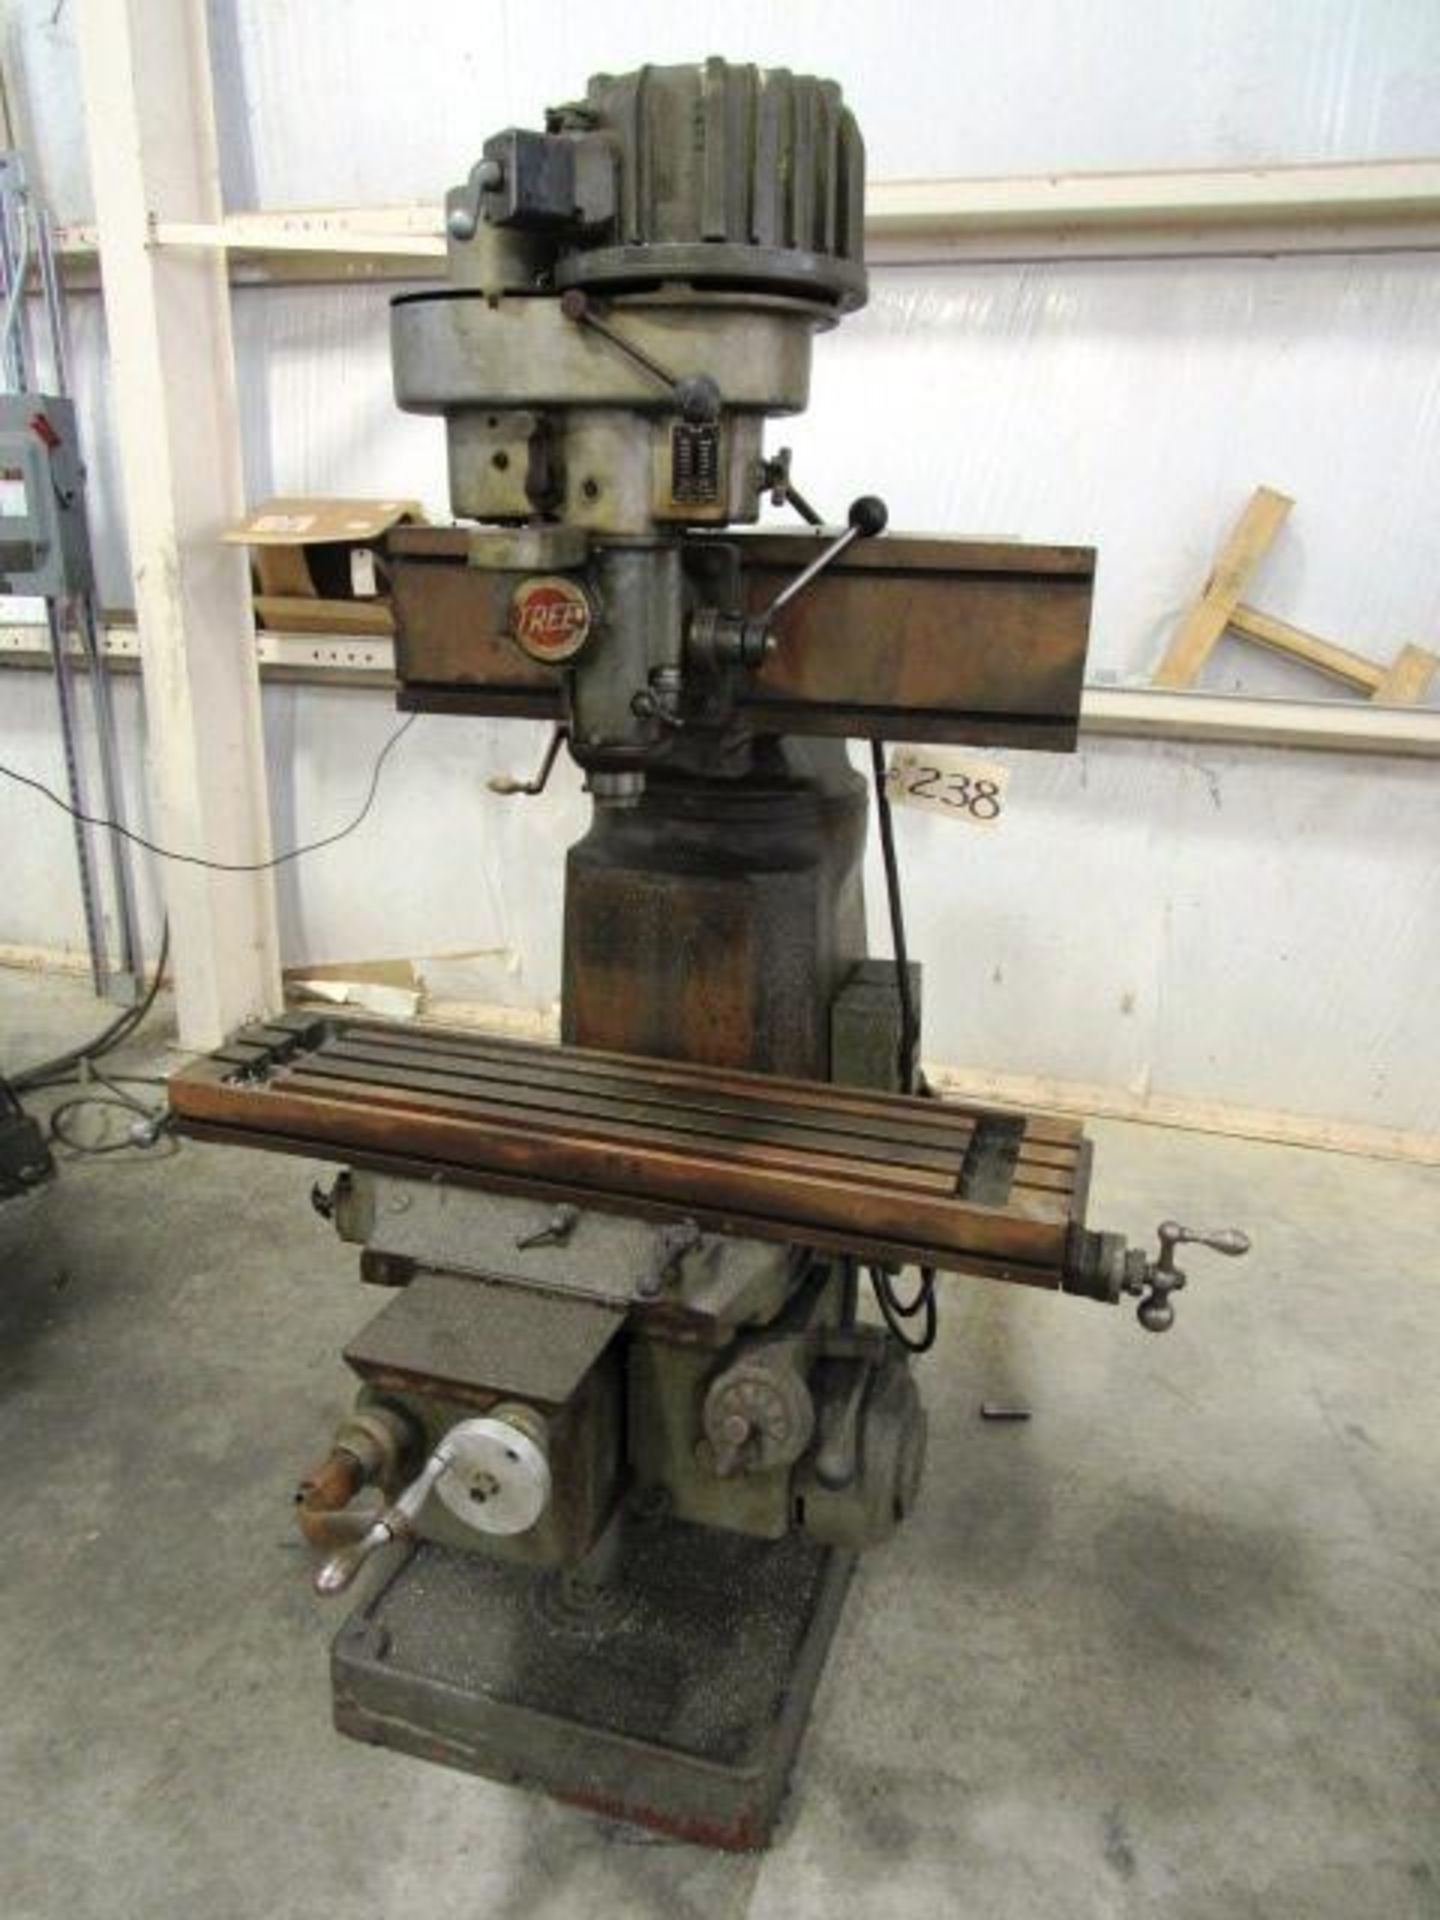 Tree Model 2UV Vertical Milling Machine with 10'' x 42'' T-Slot Table, Power Feed to Knee, Spindle